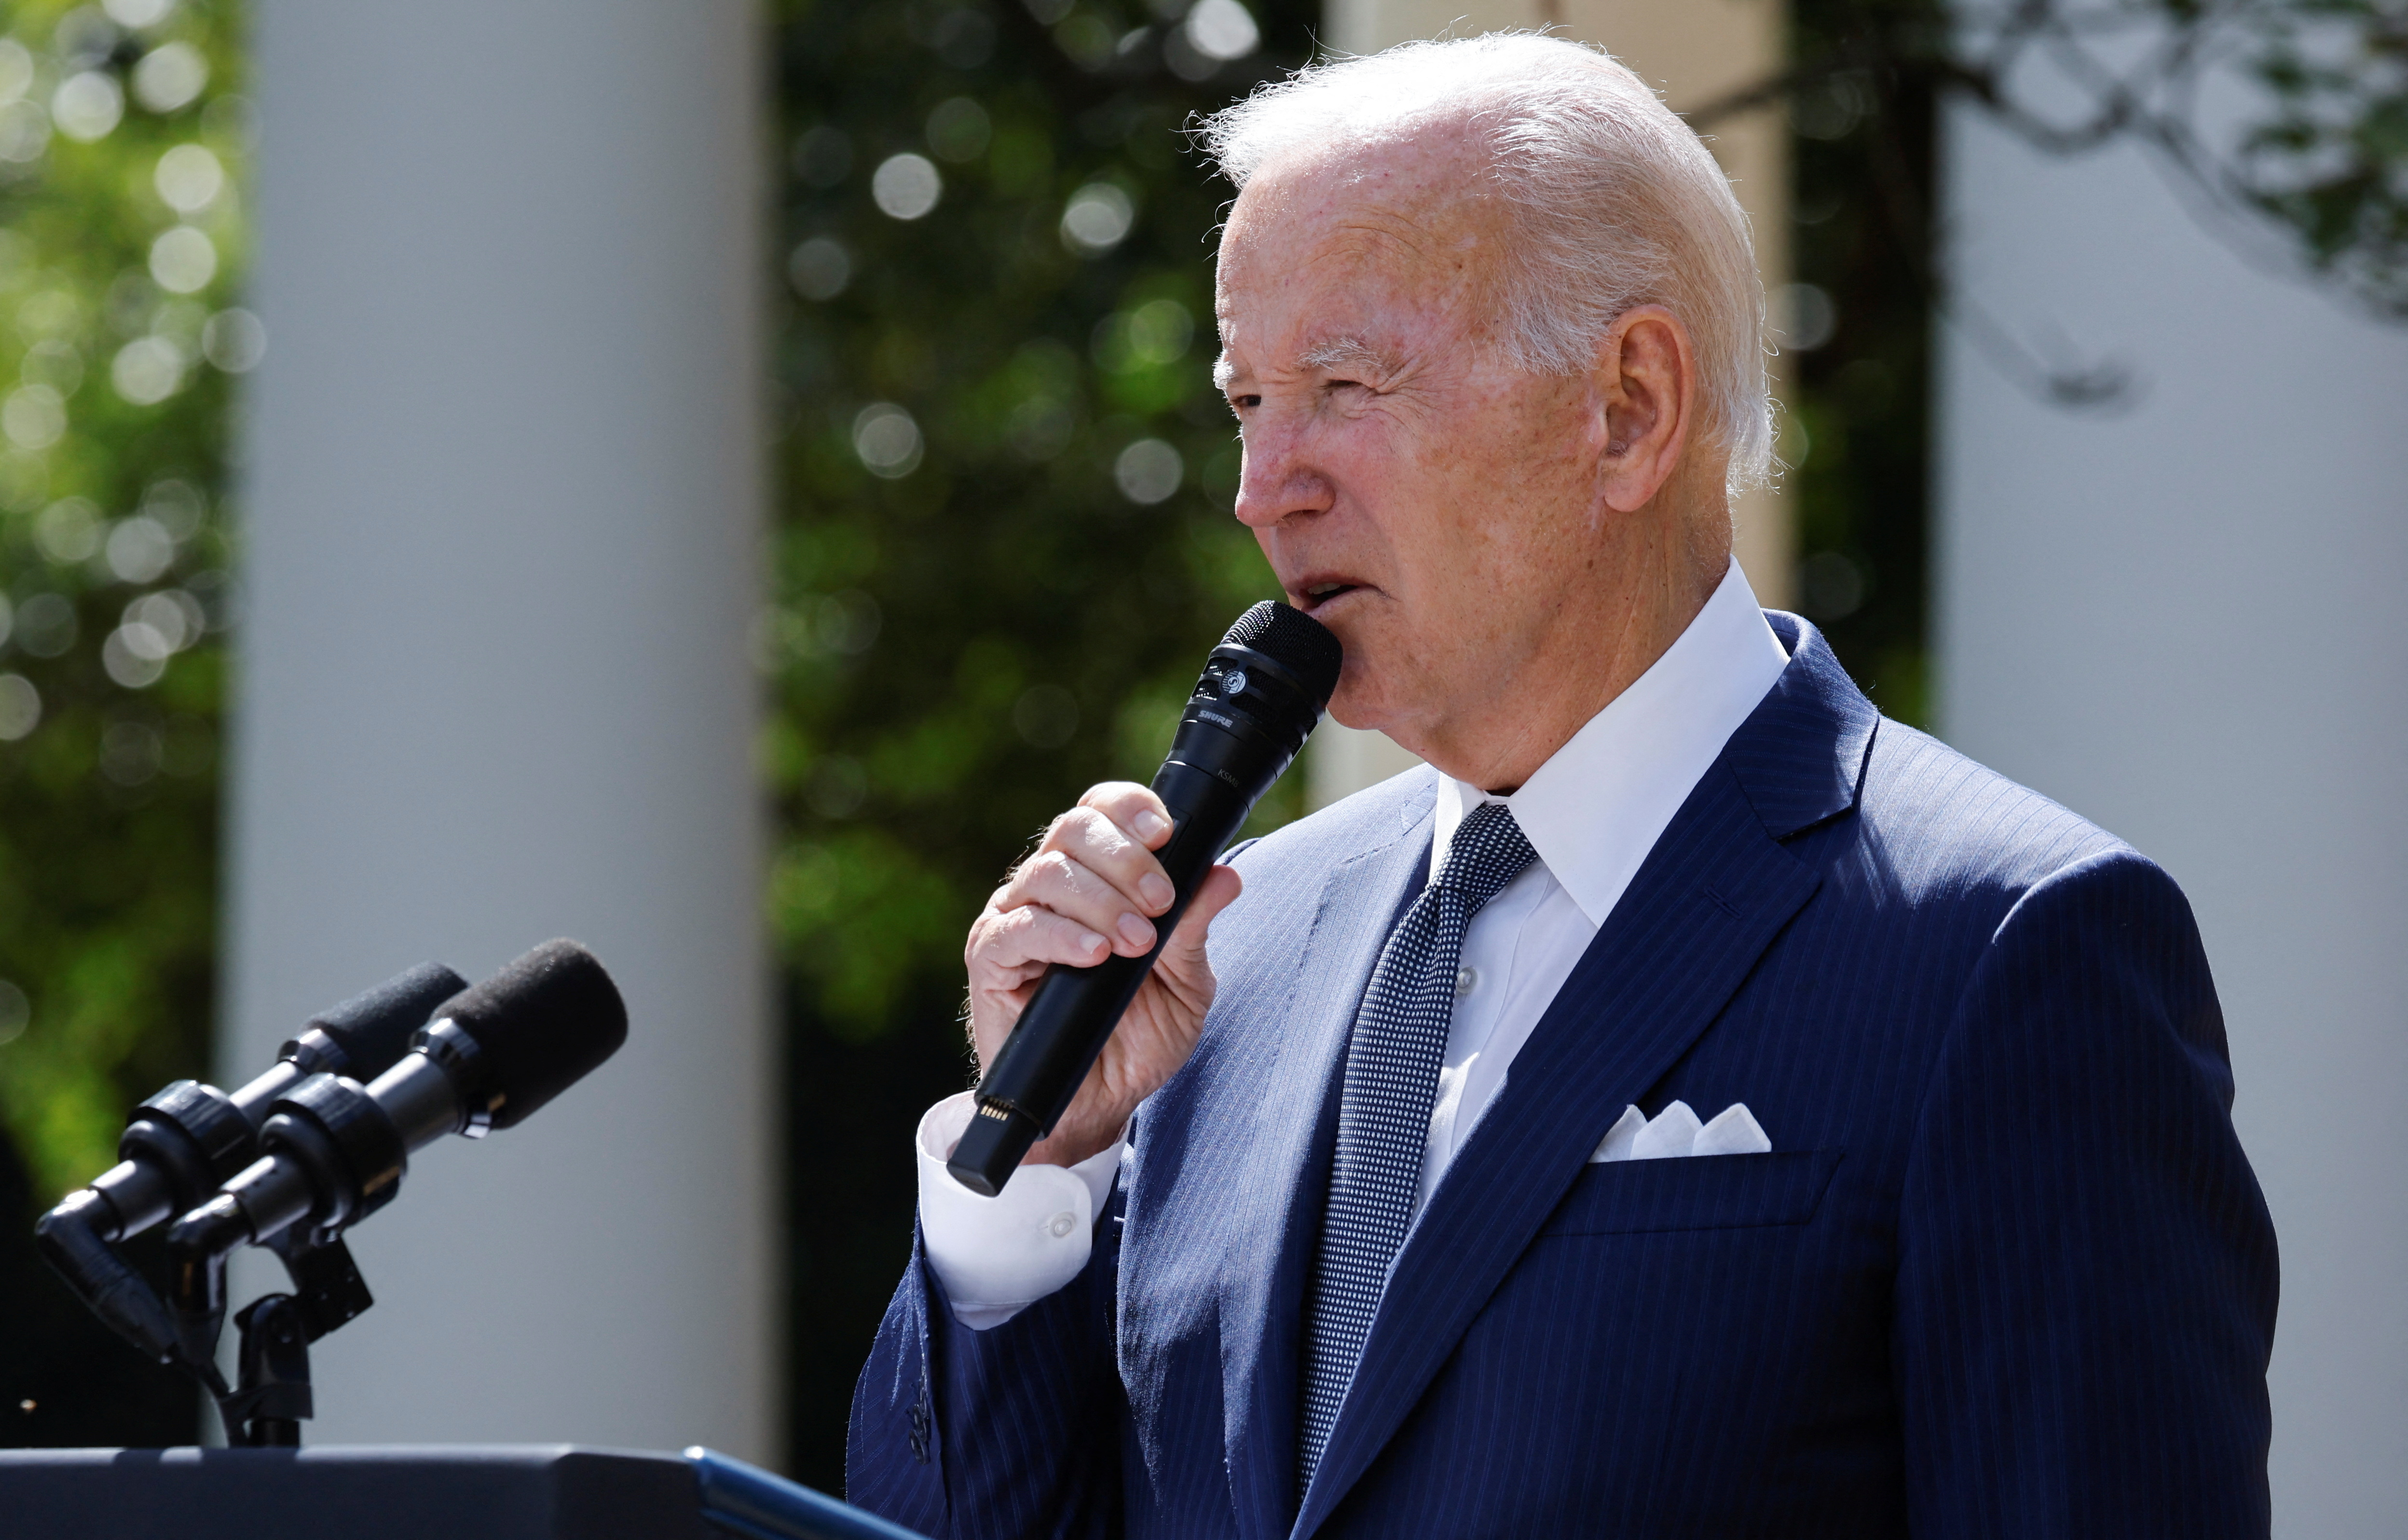 U.S. President Biden hosts event on health care costs, Medicare and Social Security at the White House to Washington